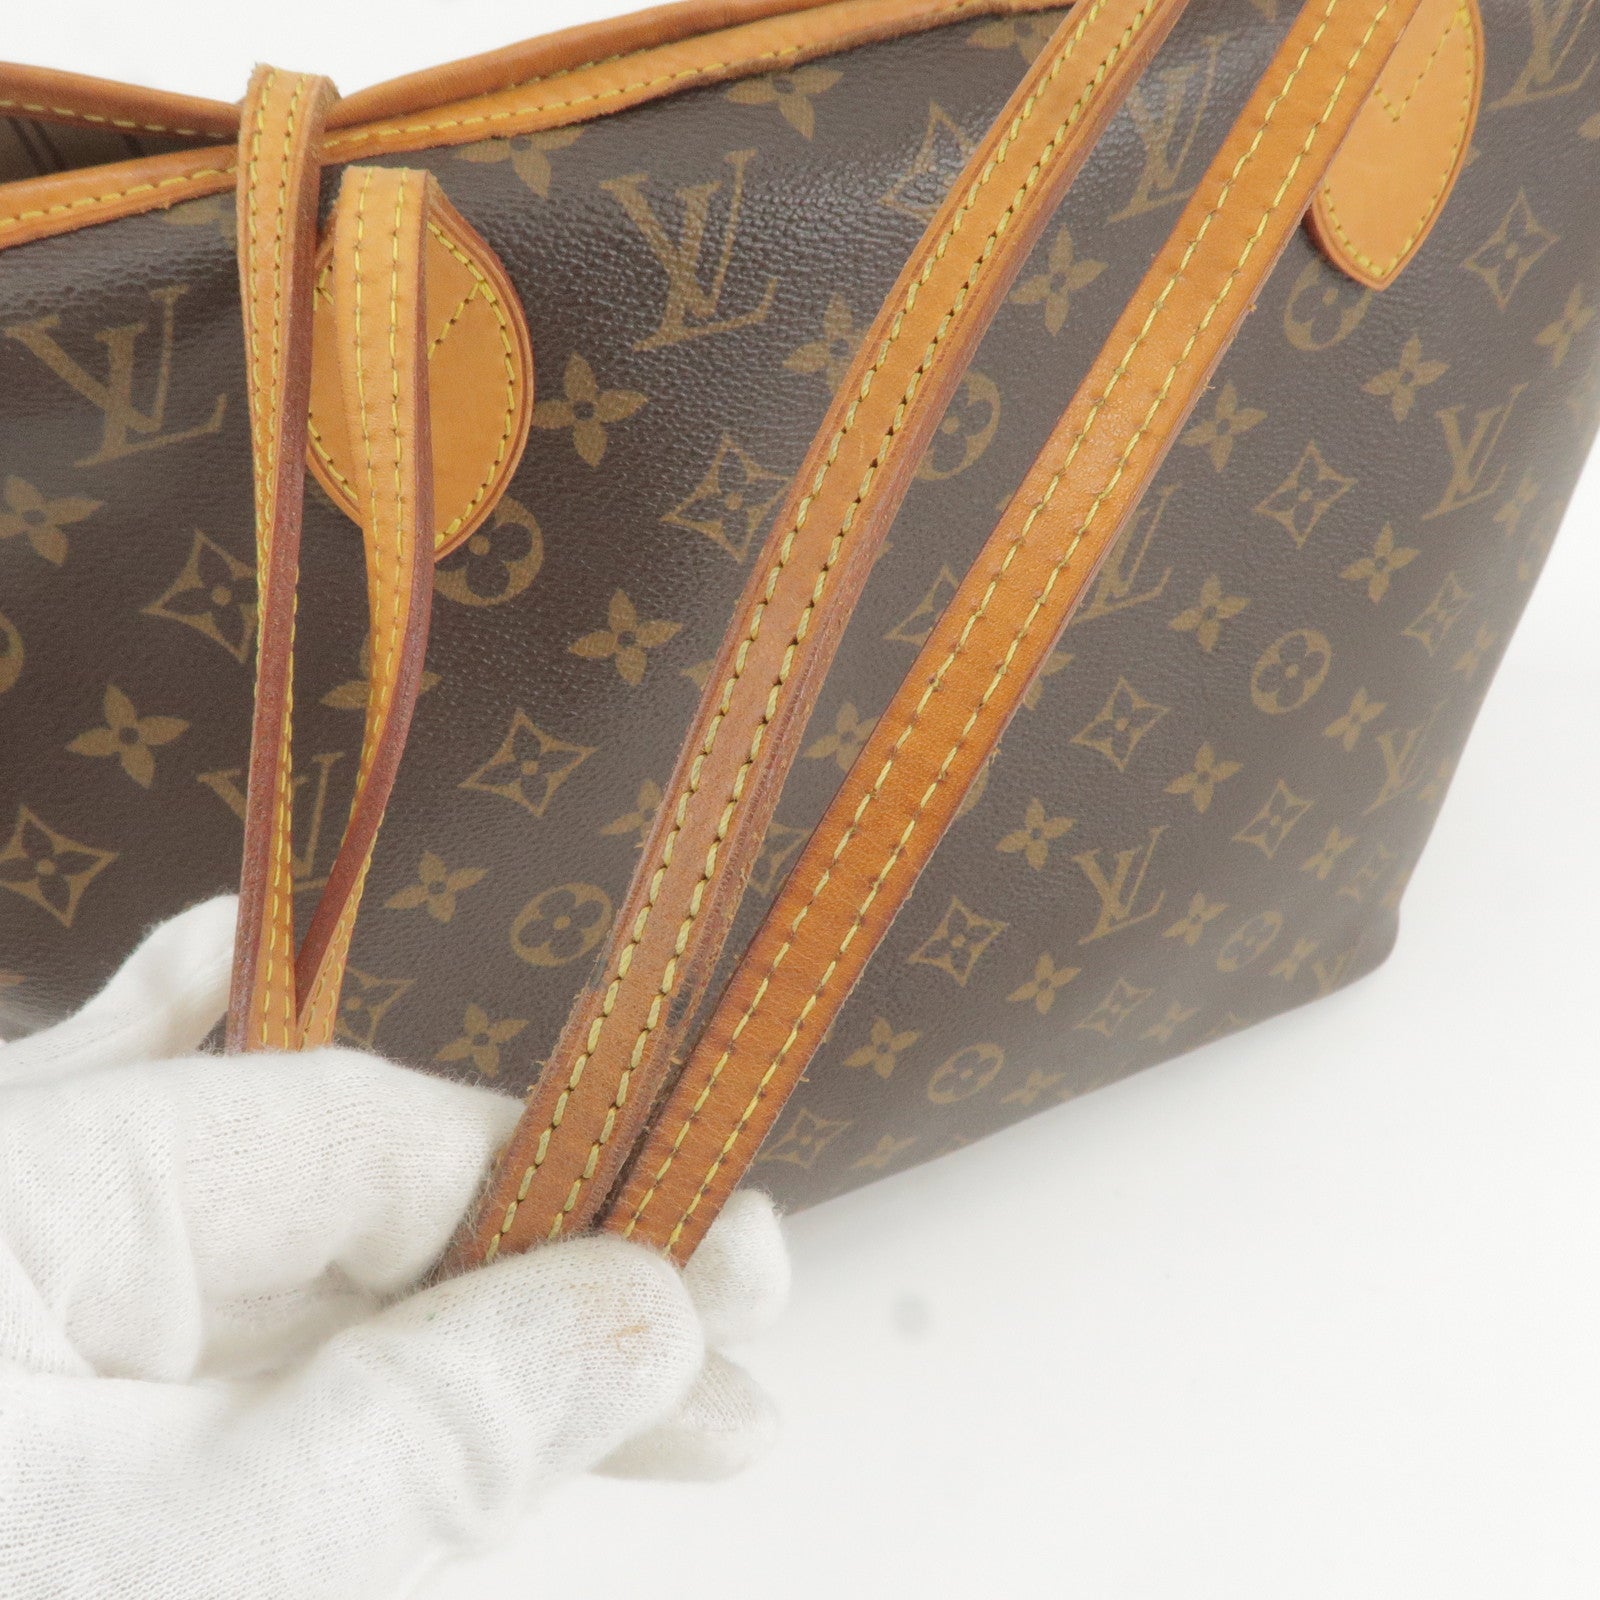 Bag - Monogram - Neverfull - Brown - Louis Vuitton wasnt the only